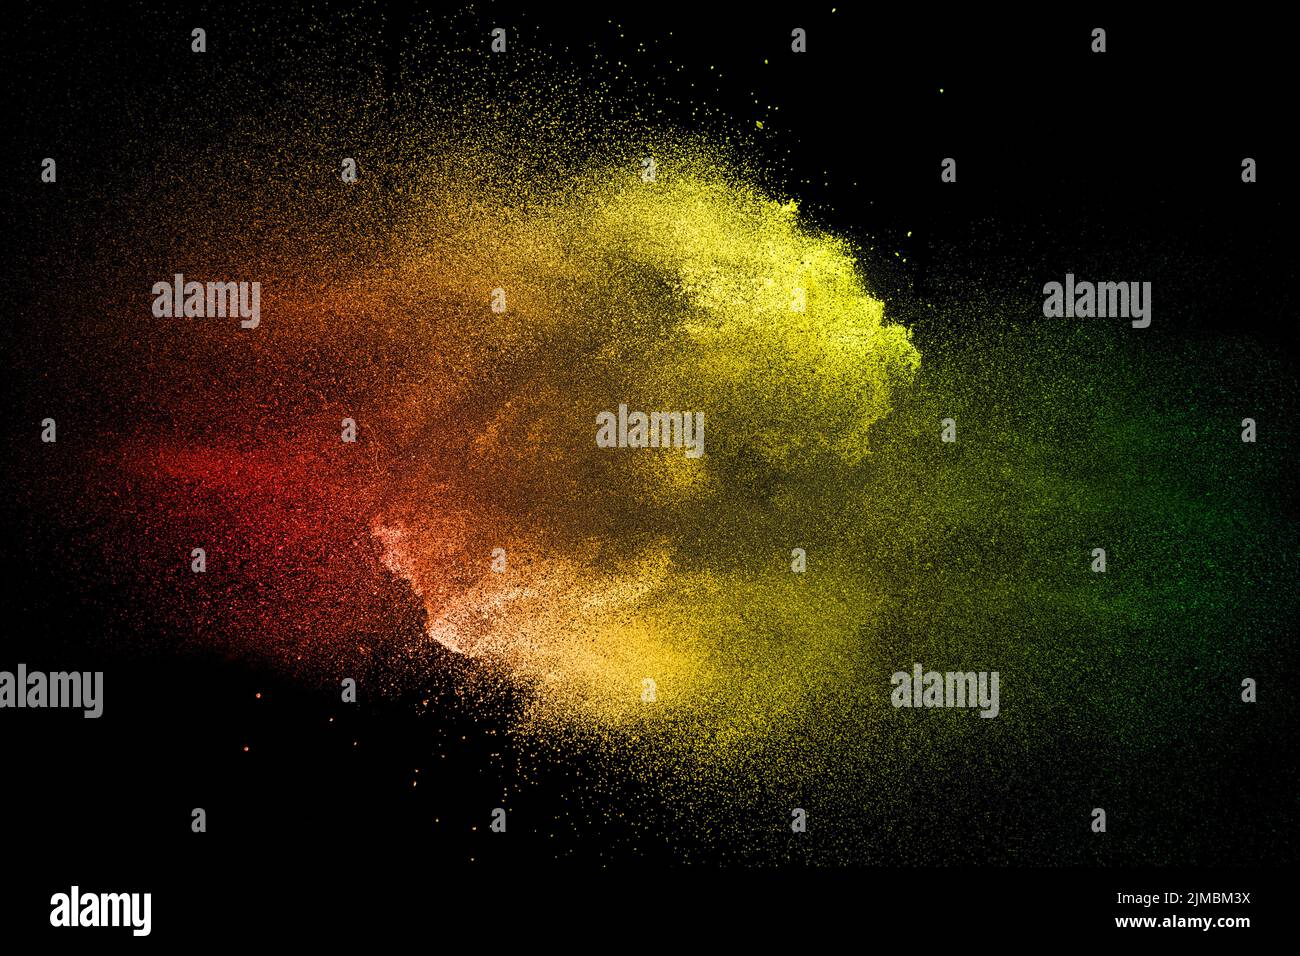 Colored dust splash cloud  on dark background. Launched yellow red particles on background. Stock Photo